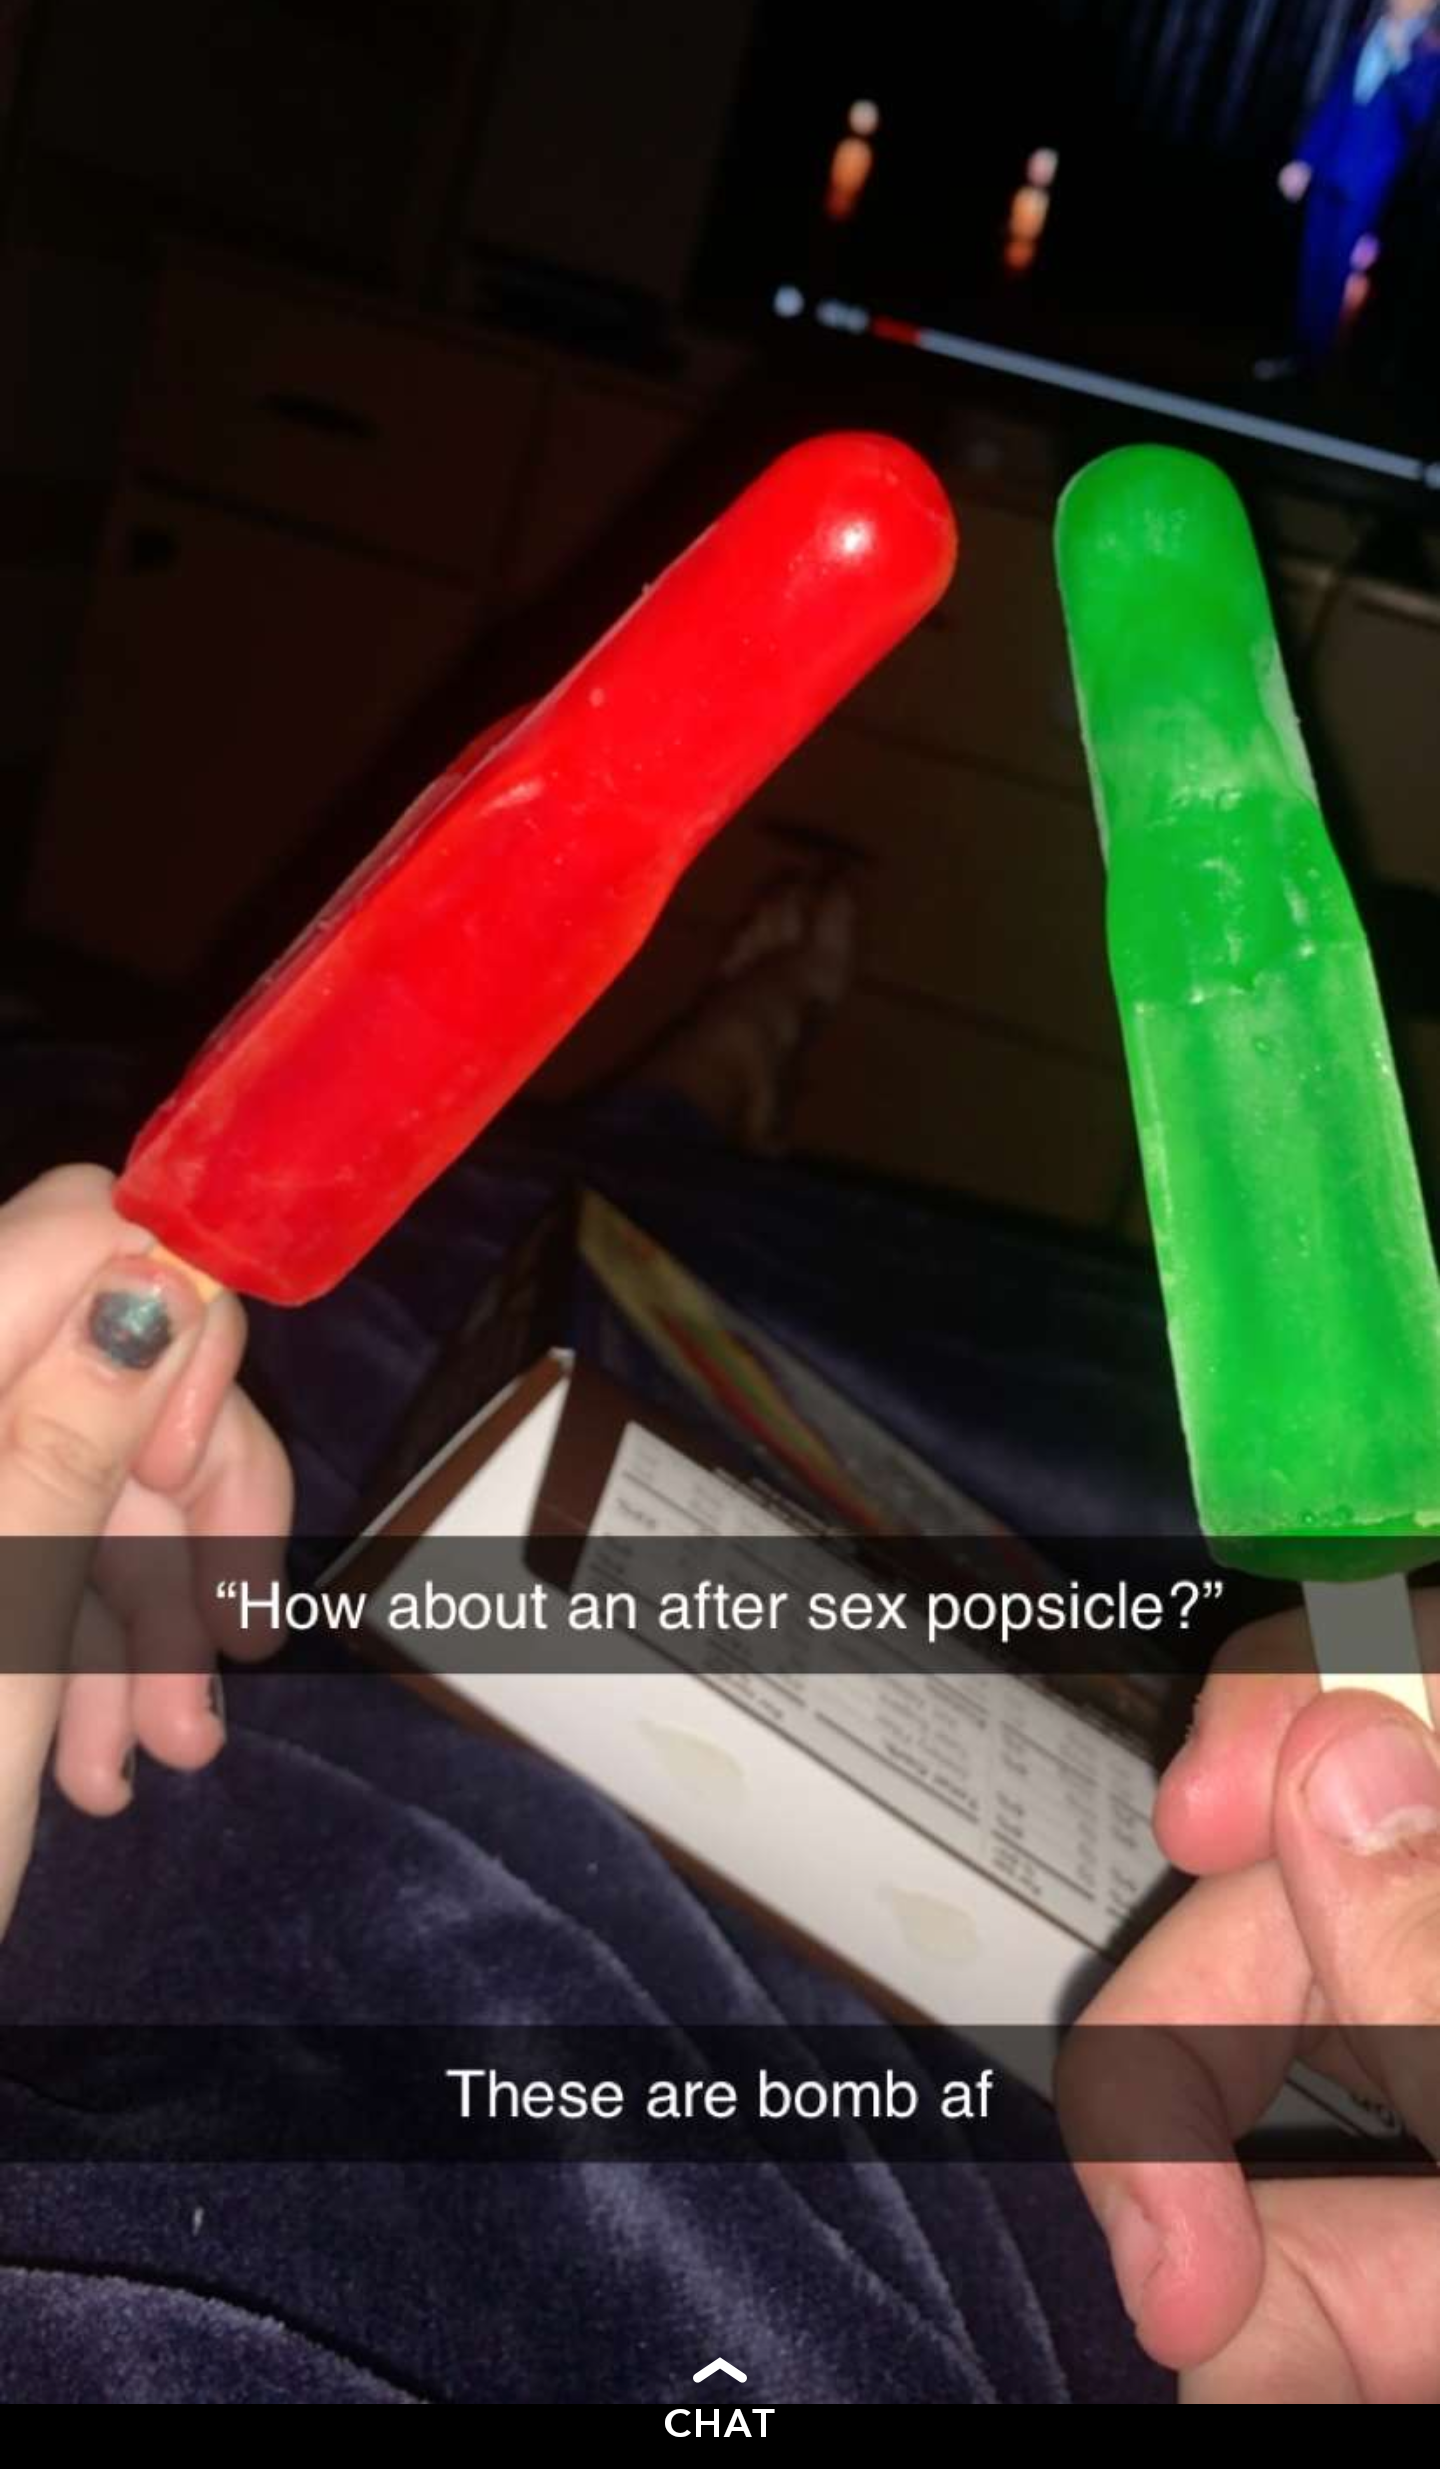 nail - "How about an after sex popsicle?" These are bomb af